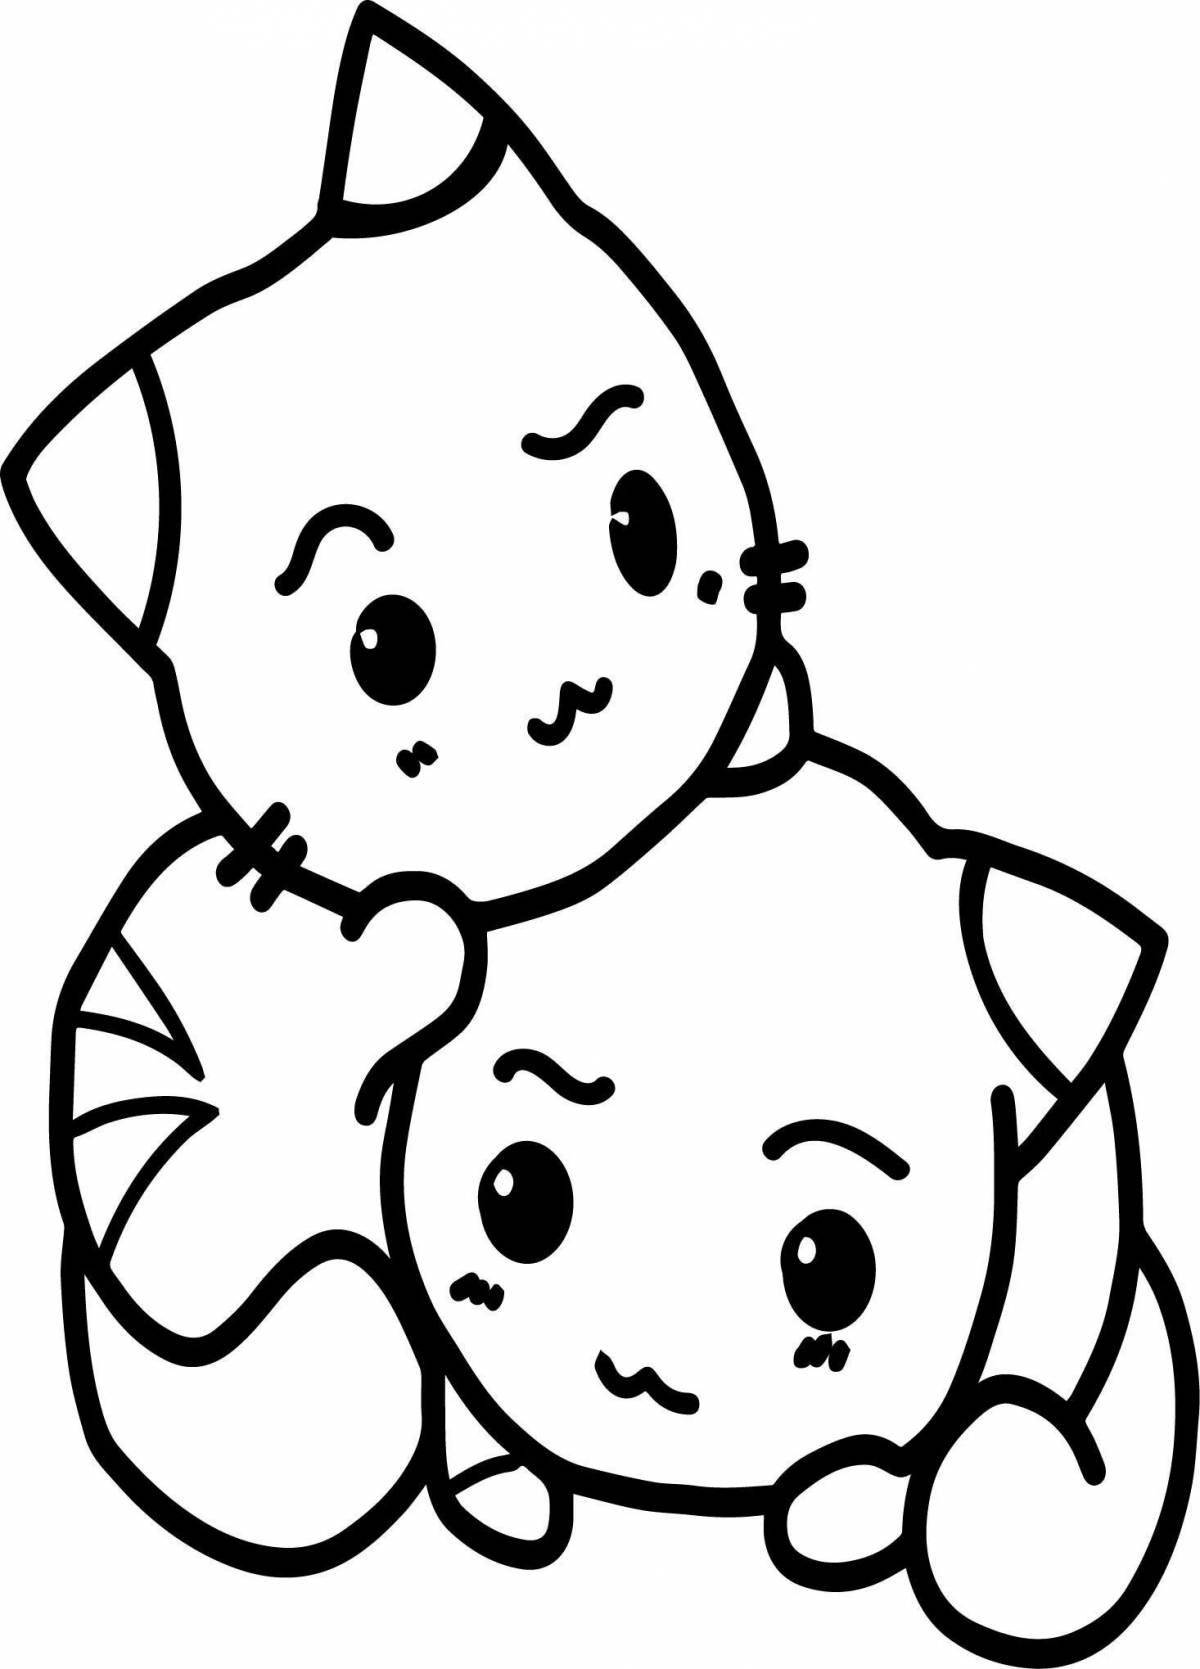 Naughty anime kittens coloring book